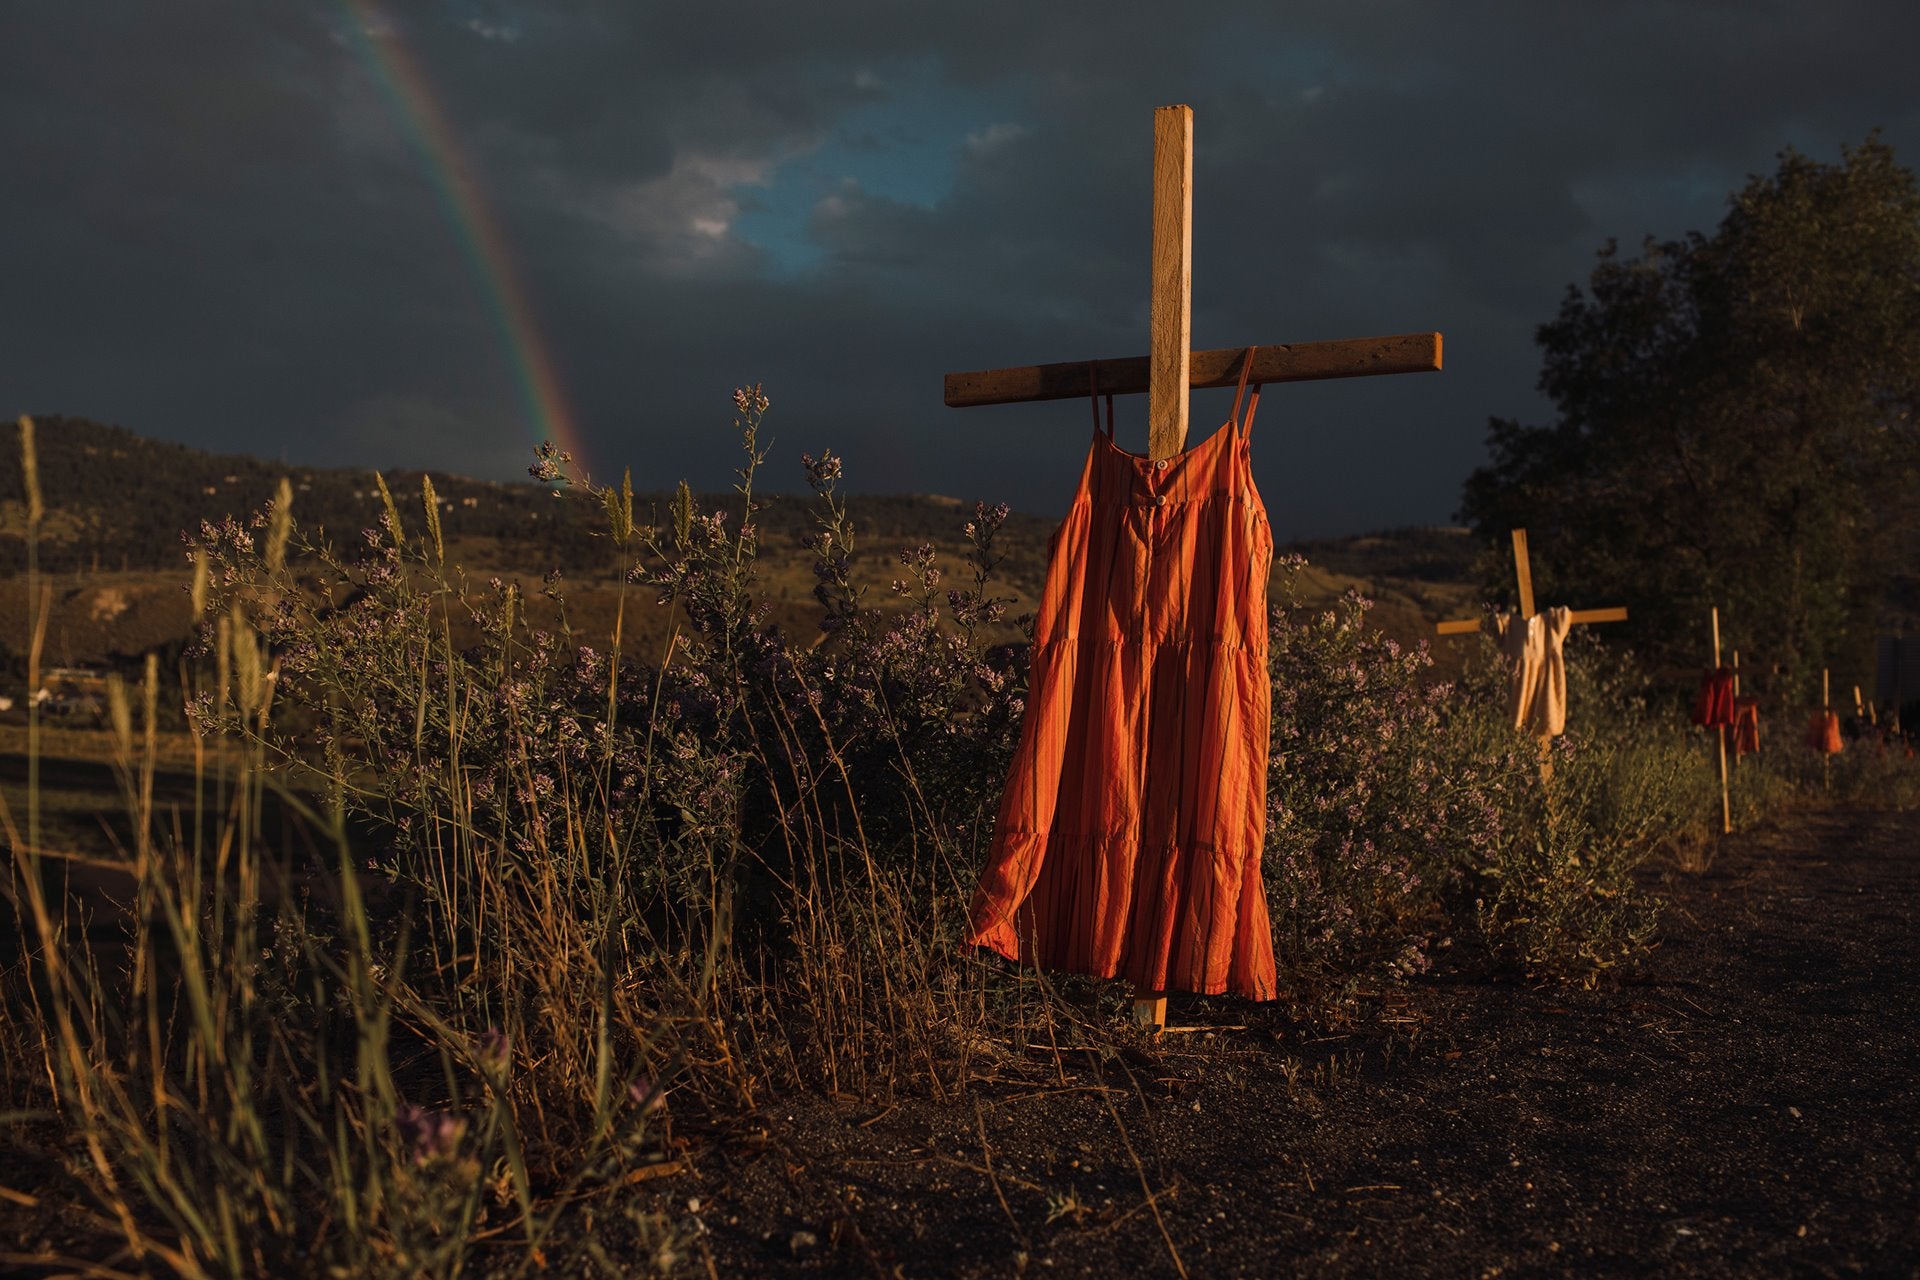 Canadian photographer Amber Bracken won the Singles category for her photo showing red dresses hung on crosses to commemorate the Indigenous children who died at the Kamloops Indian Residential School.